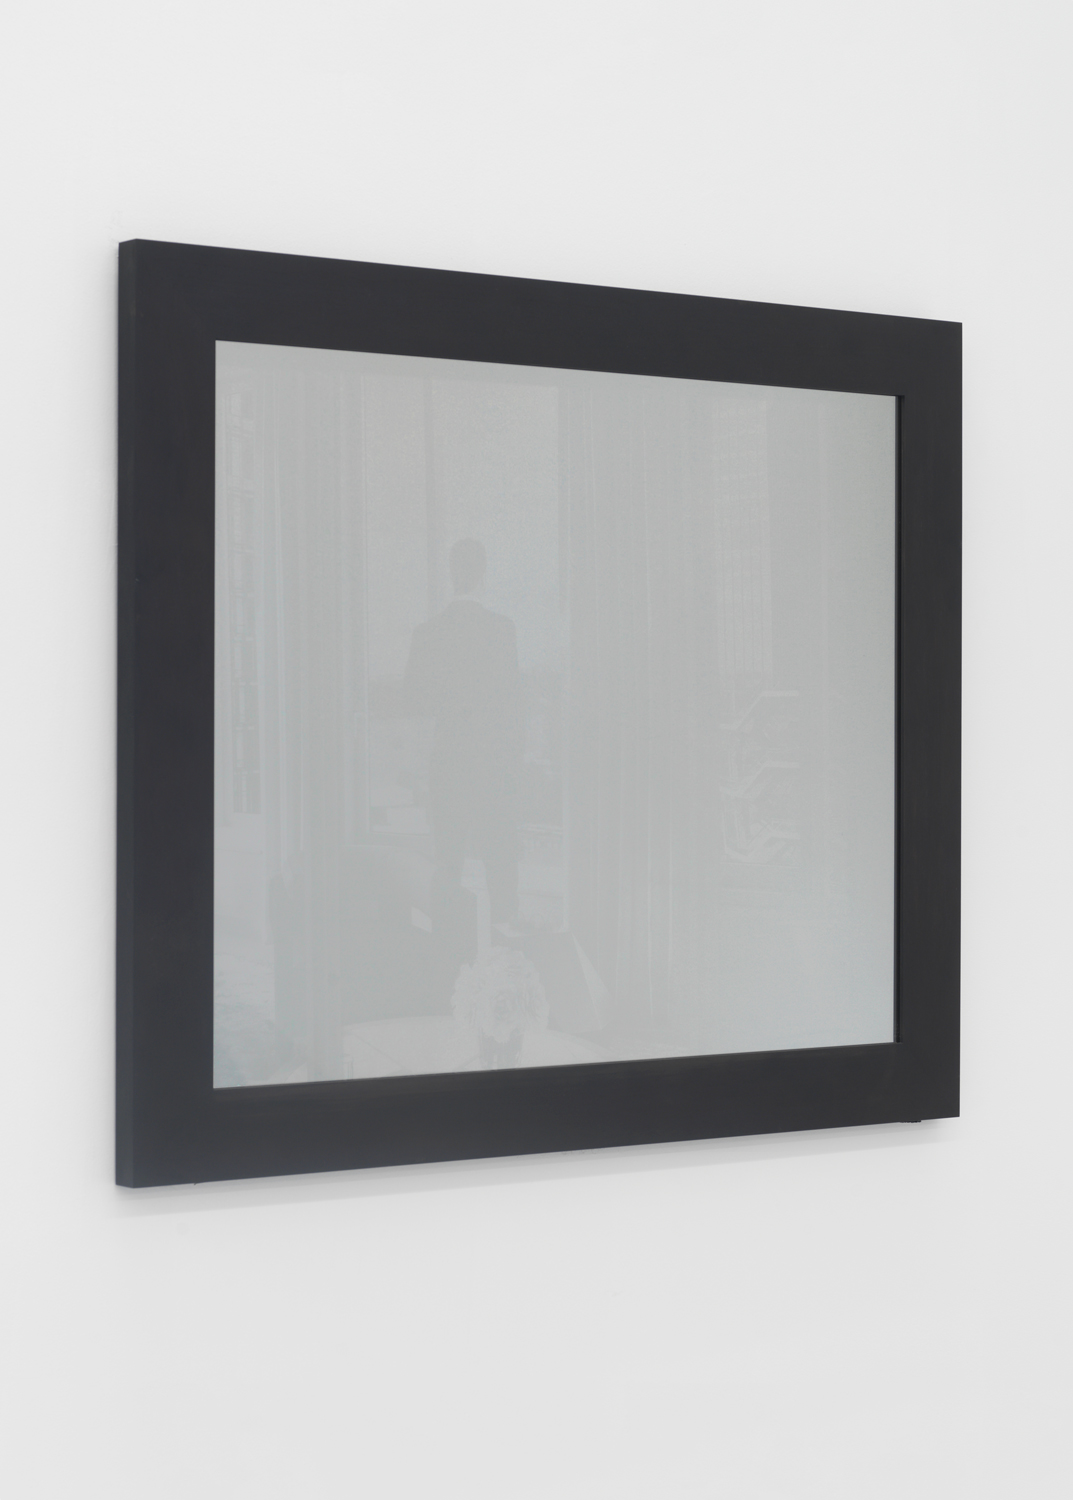 Peter Scott, Untitled (Highline, 2018), 2018, false wall, one way mirror, photograph, dimensions variable